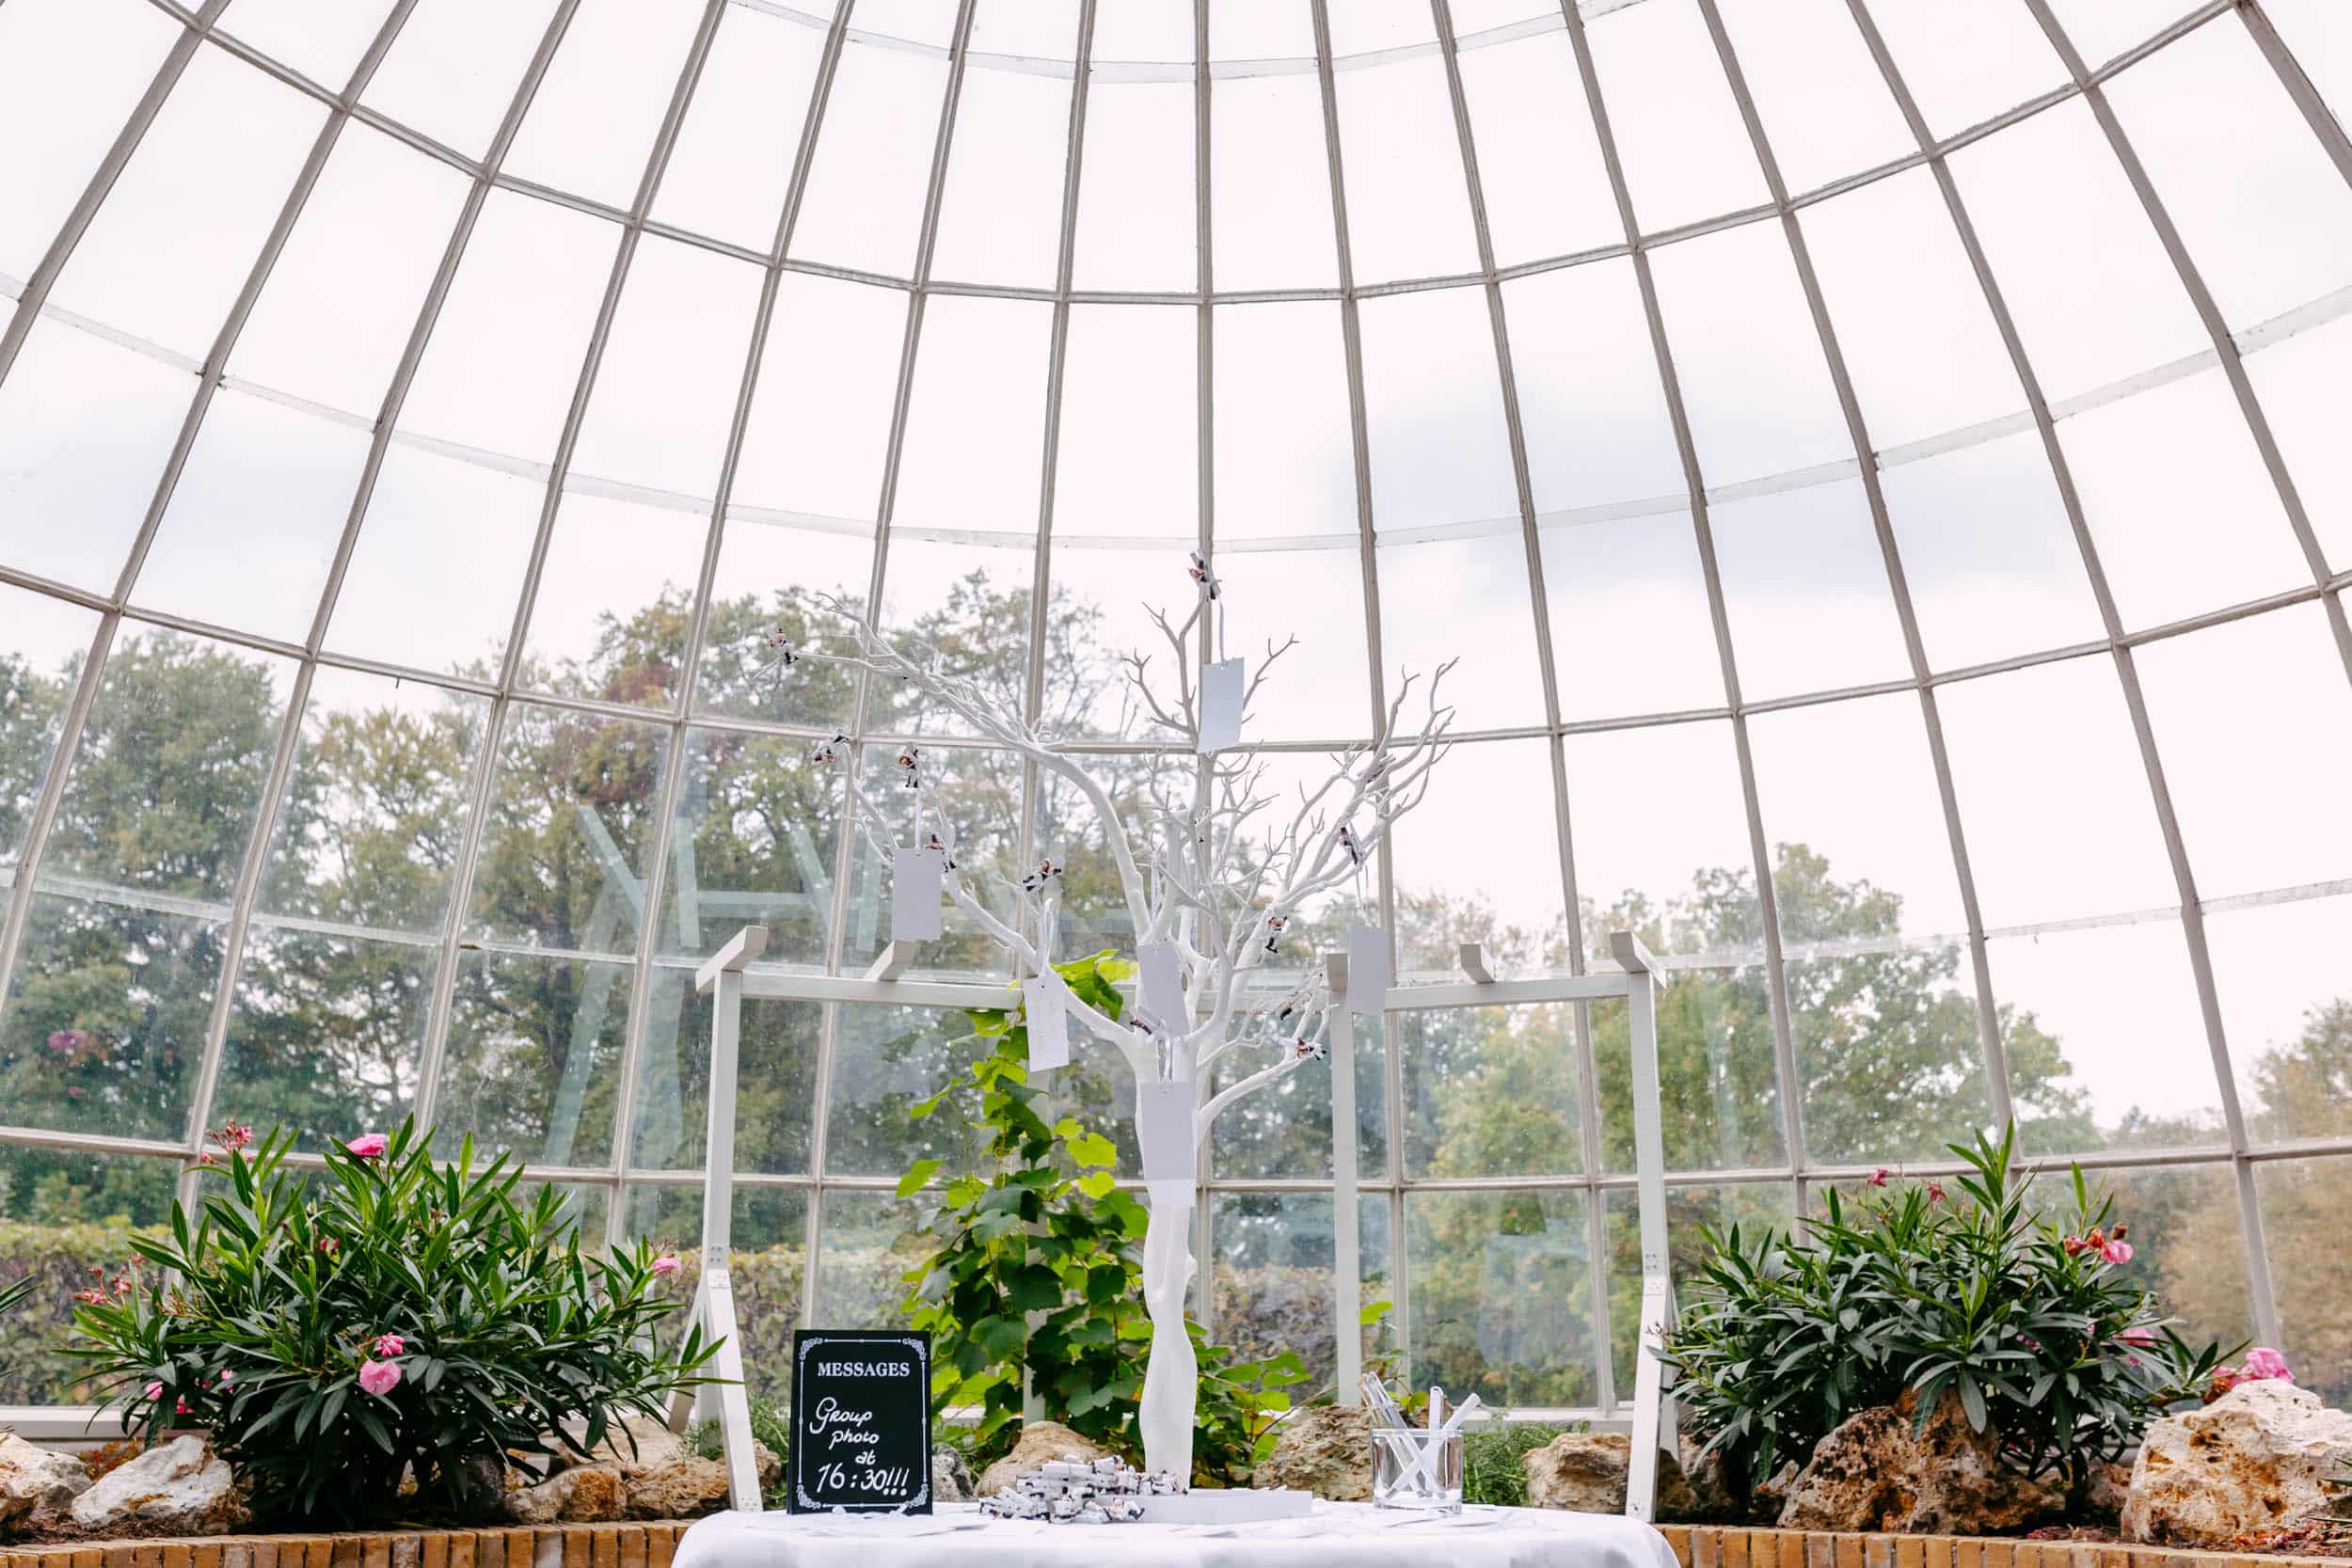 In an Orangery, a table is set up in a greenhouse.